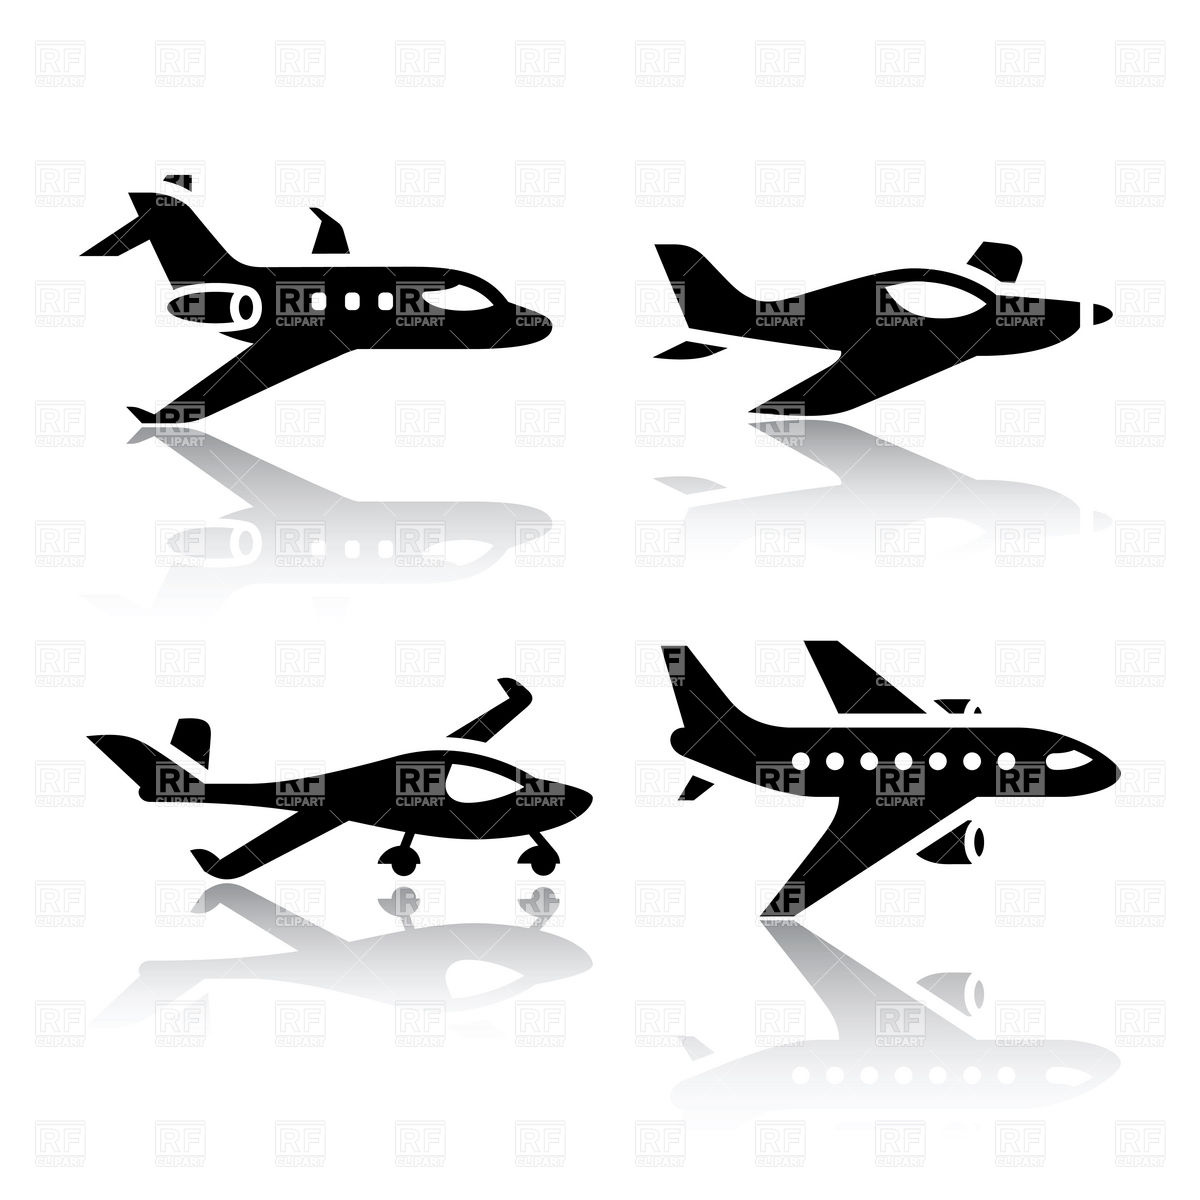 Jetliner And Glider Download Royalty Free Vector Clipart  Eps